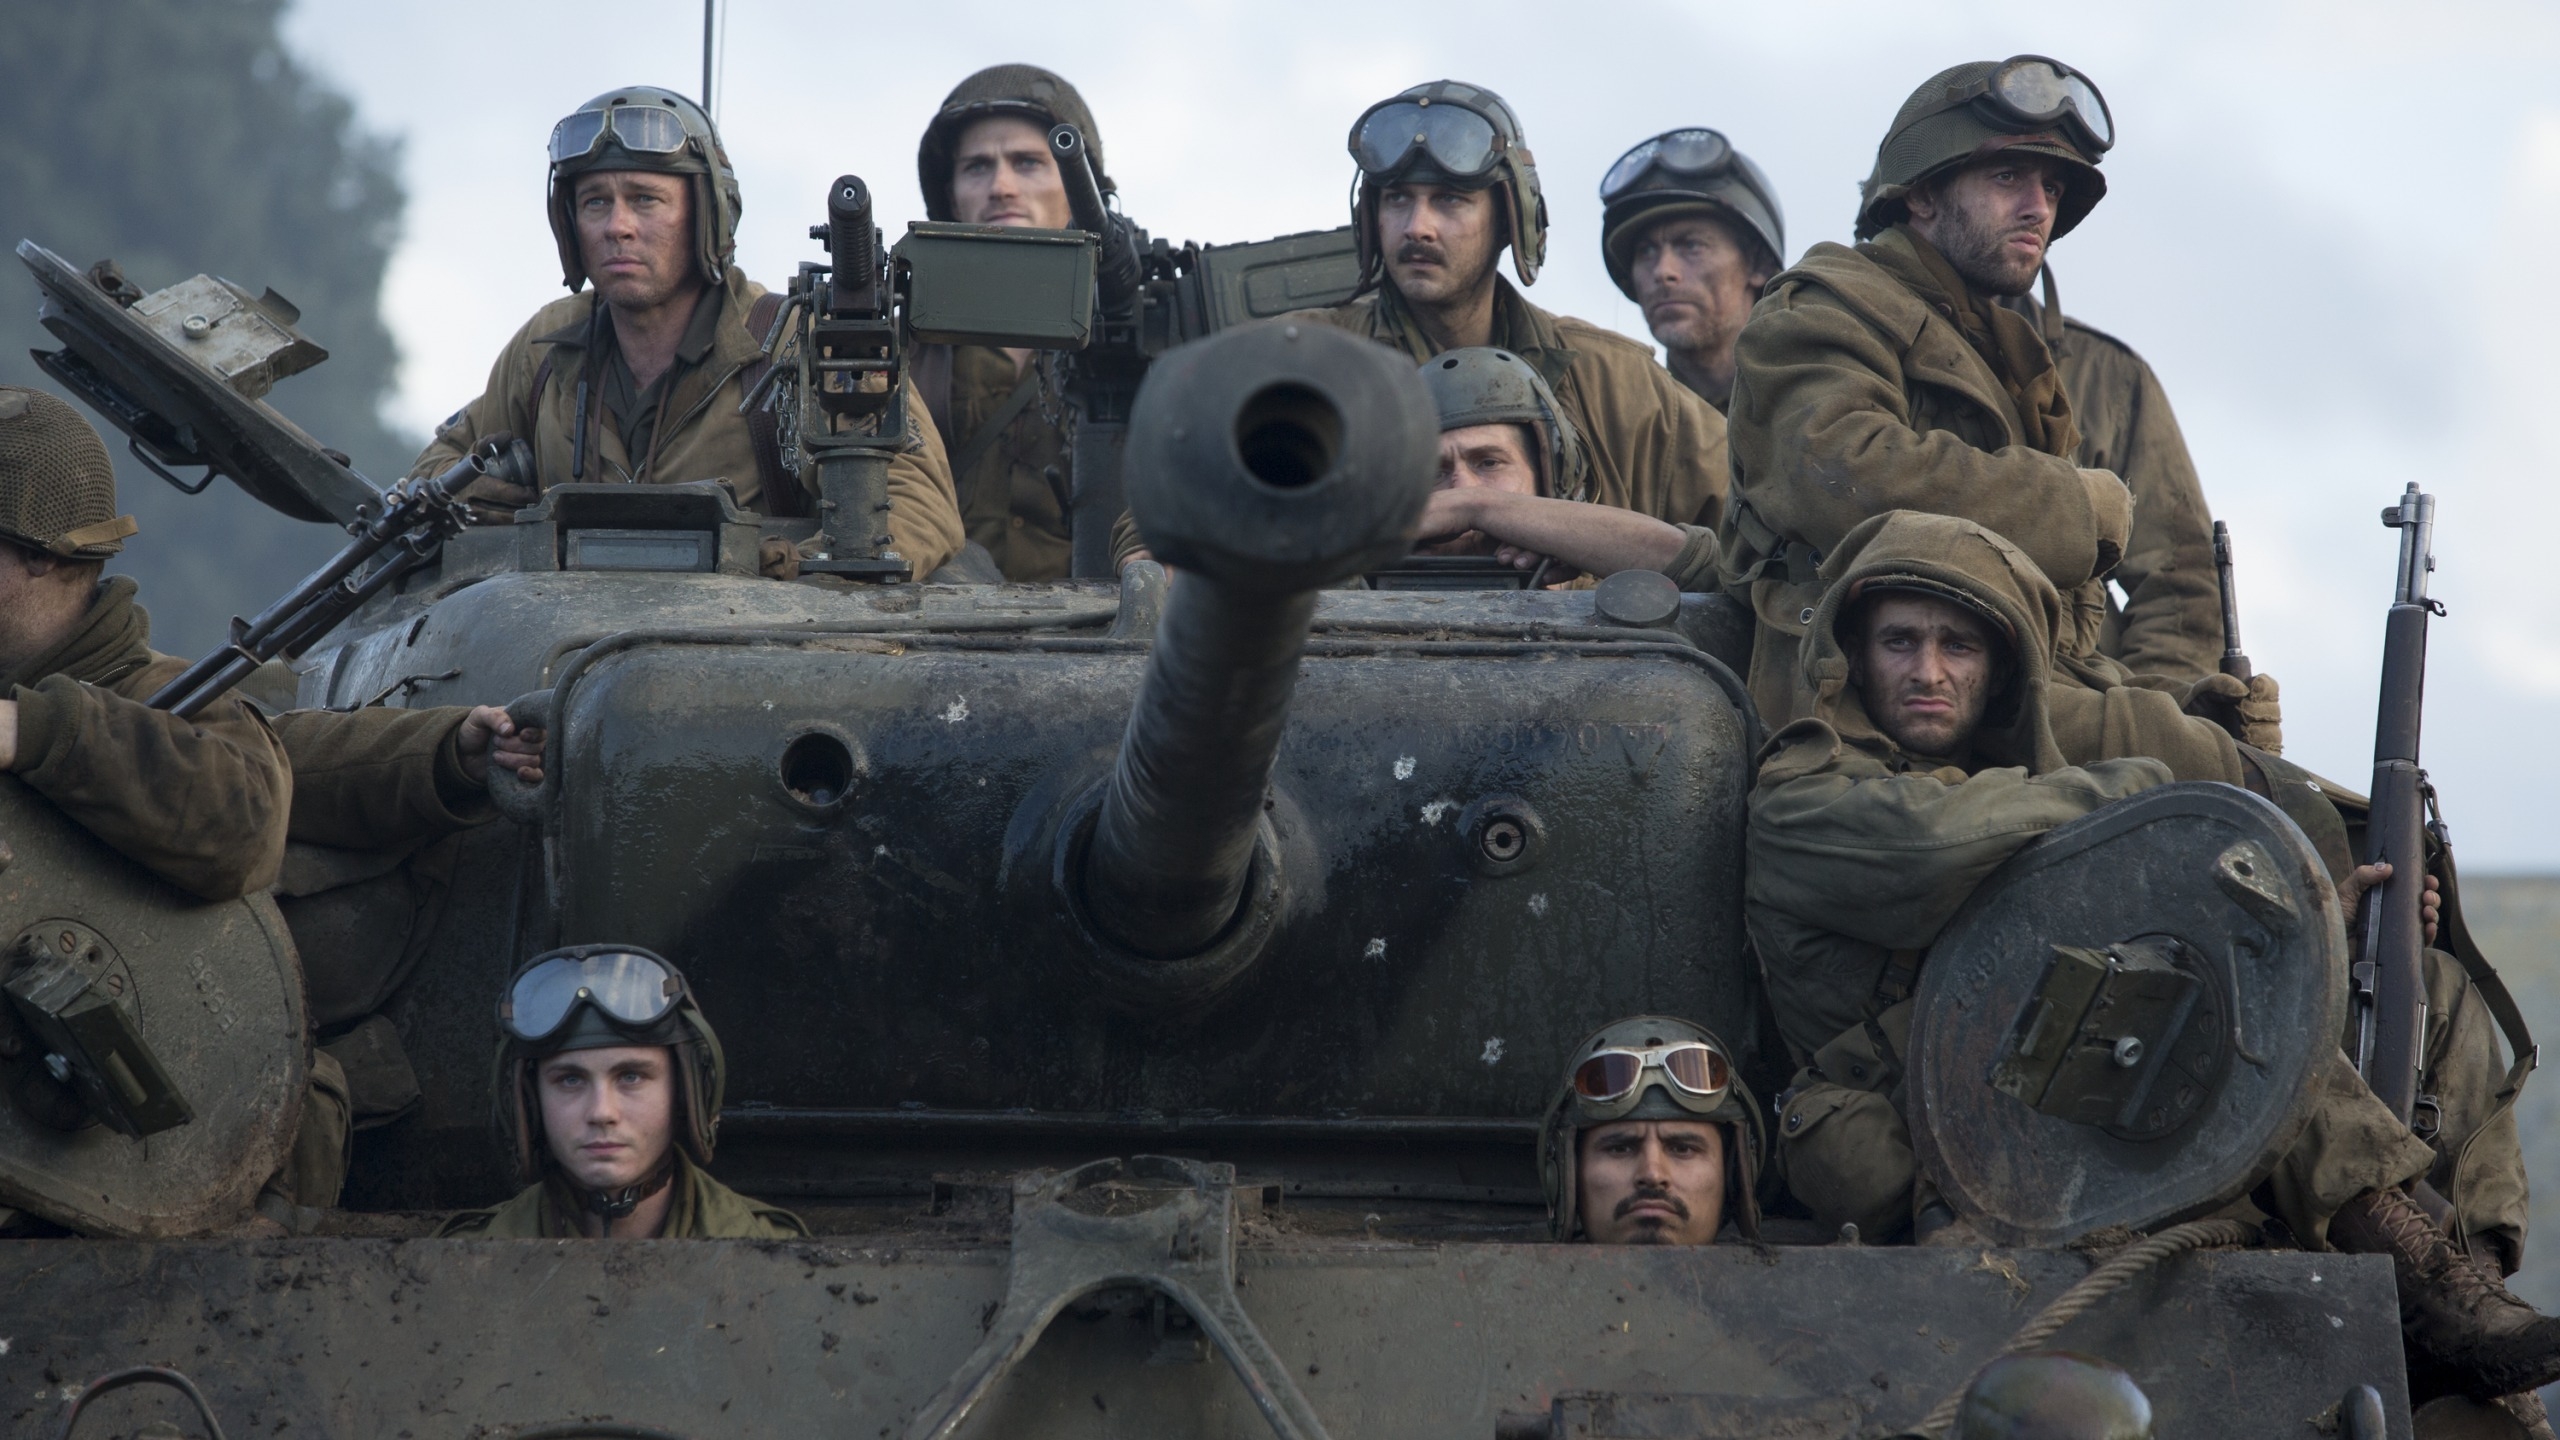 Fury Movie 2014 for 2560x1440 HDTV resolution